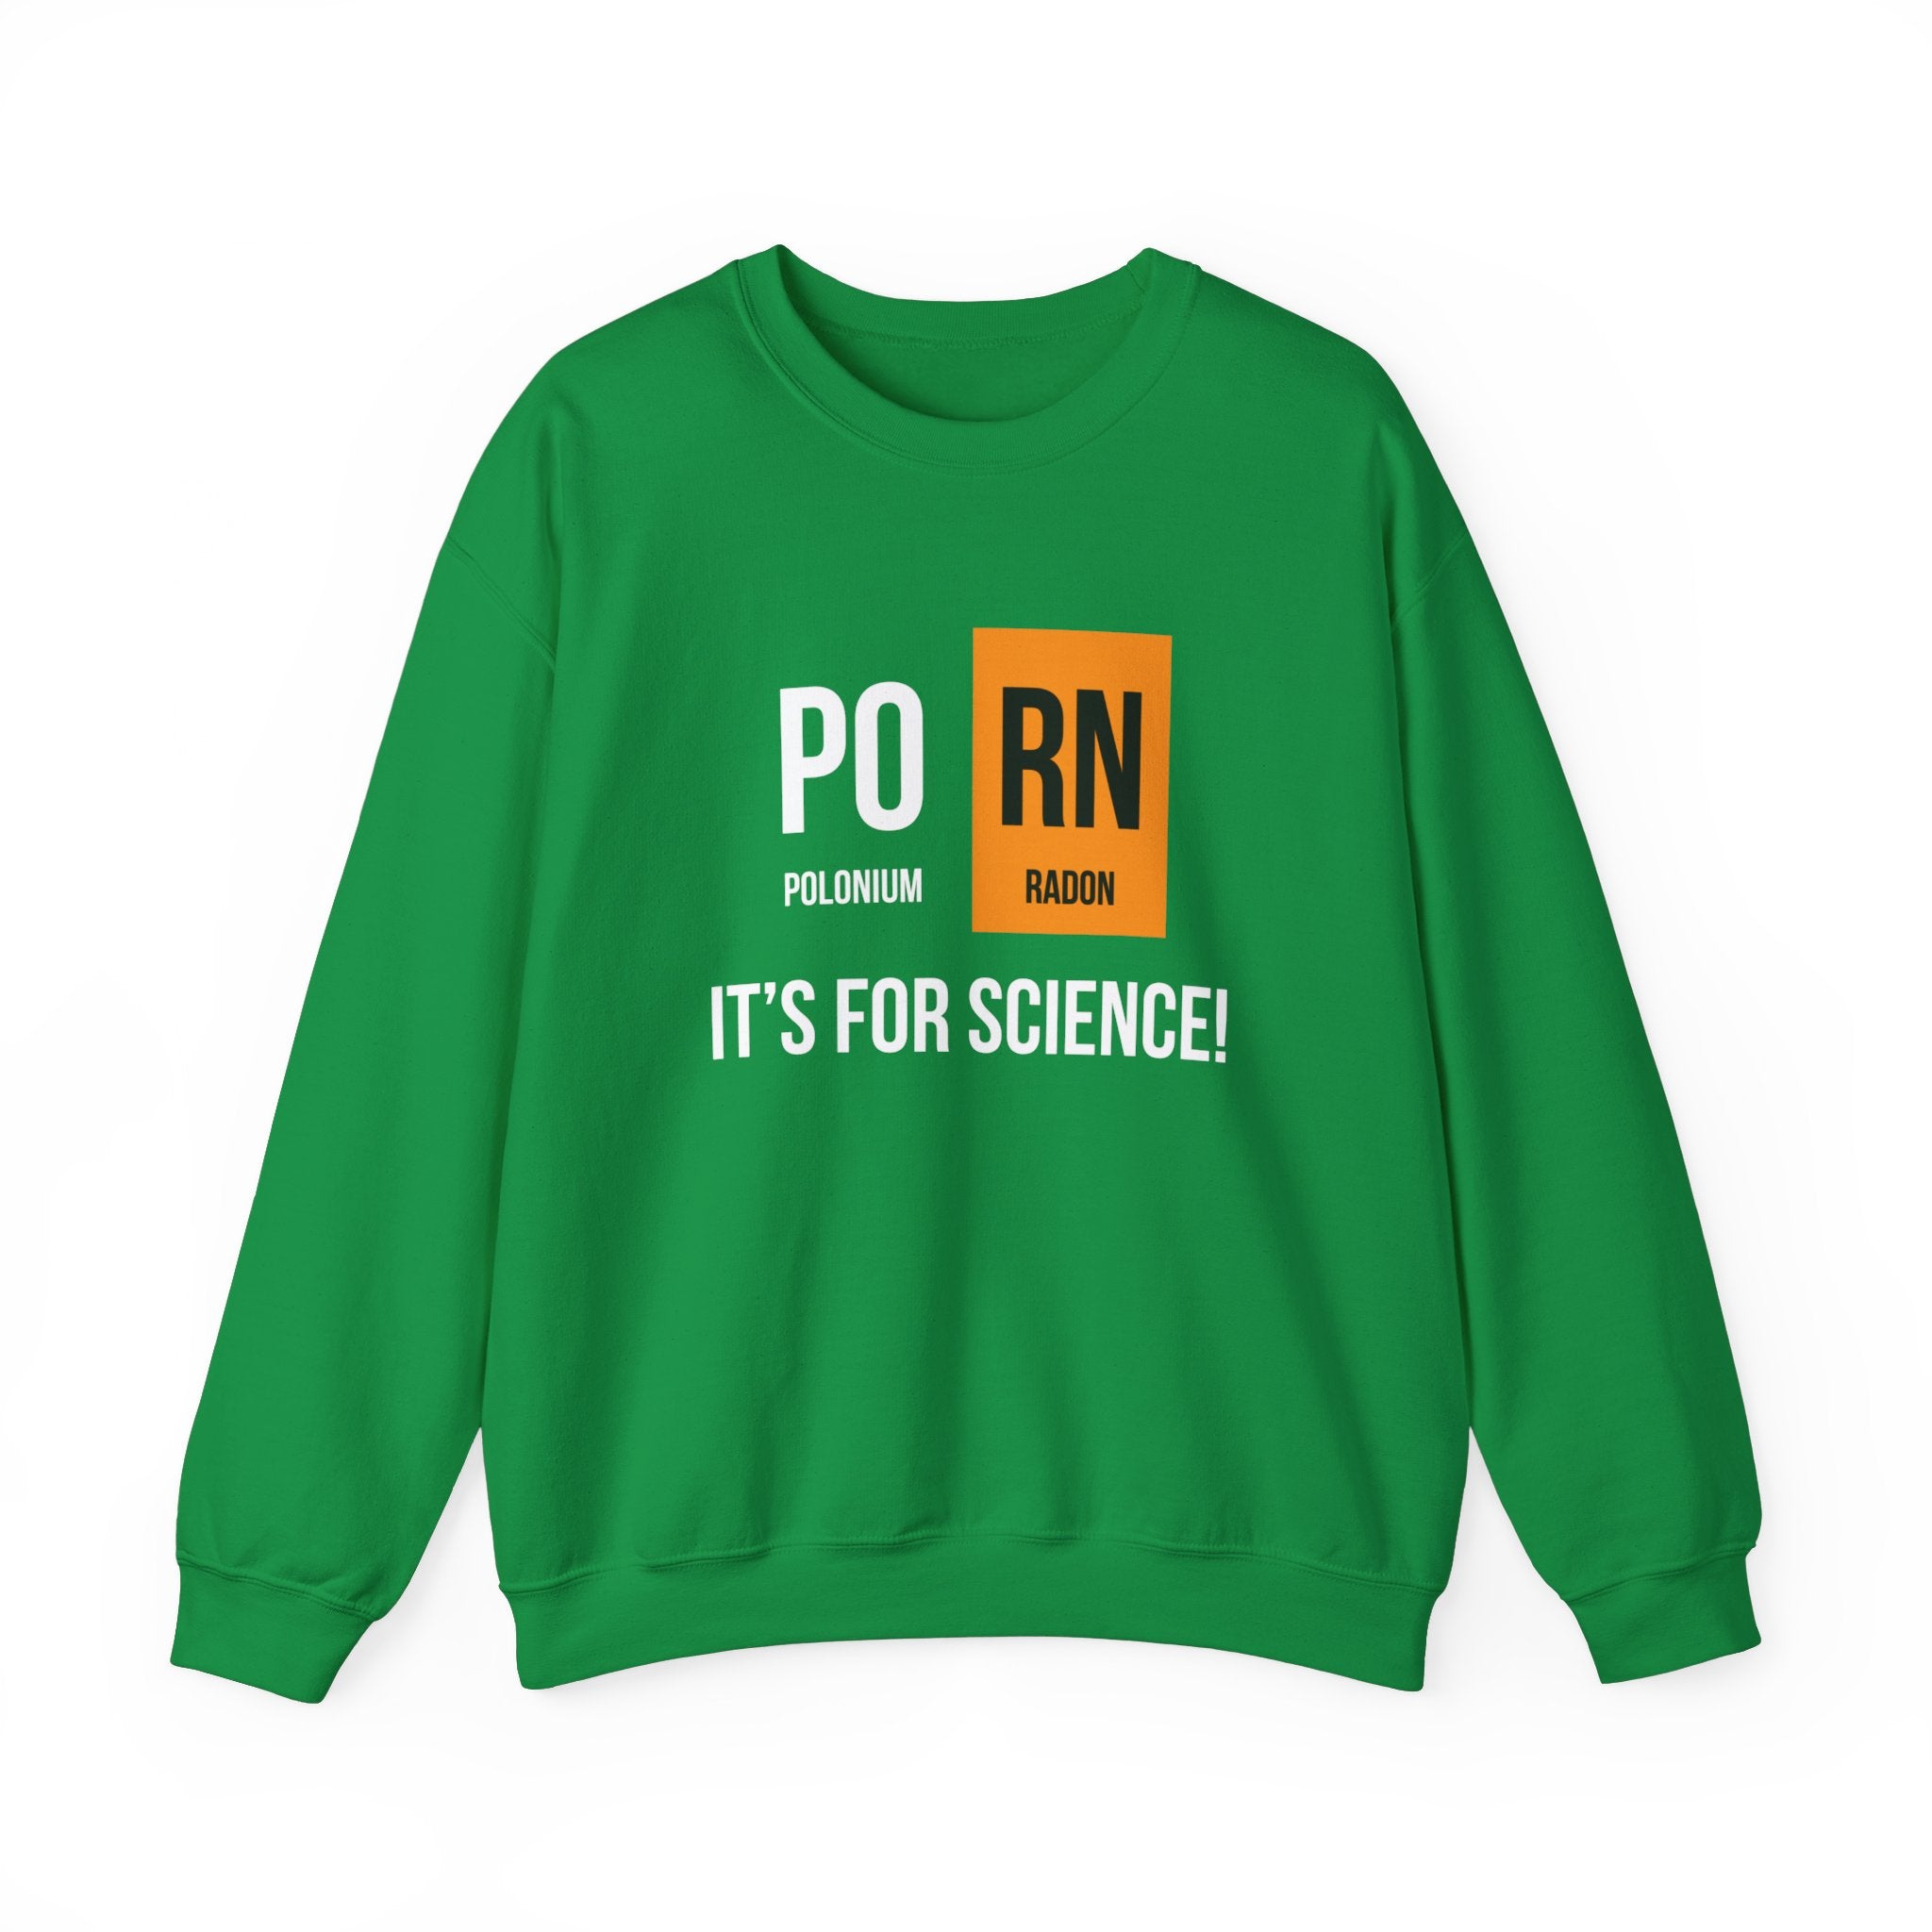 PO-RN - Sweatshirt featuring "PO" and "RN" elements from the periodic table. "Polonium" and "Radon" are written below, with "It's for science!" in white text underneath. Perfect for the colder months to transform chills into thrills!